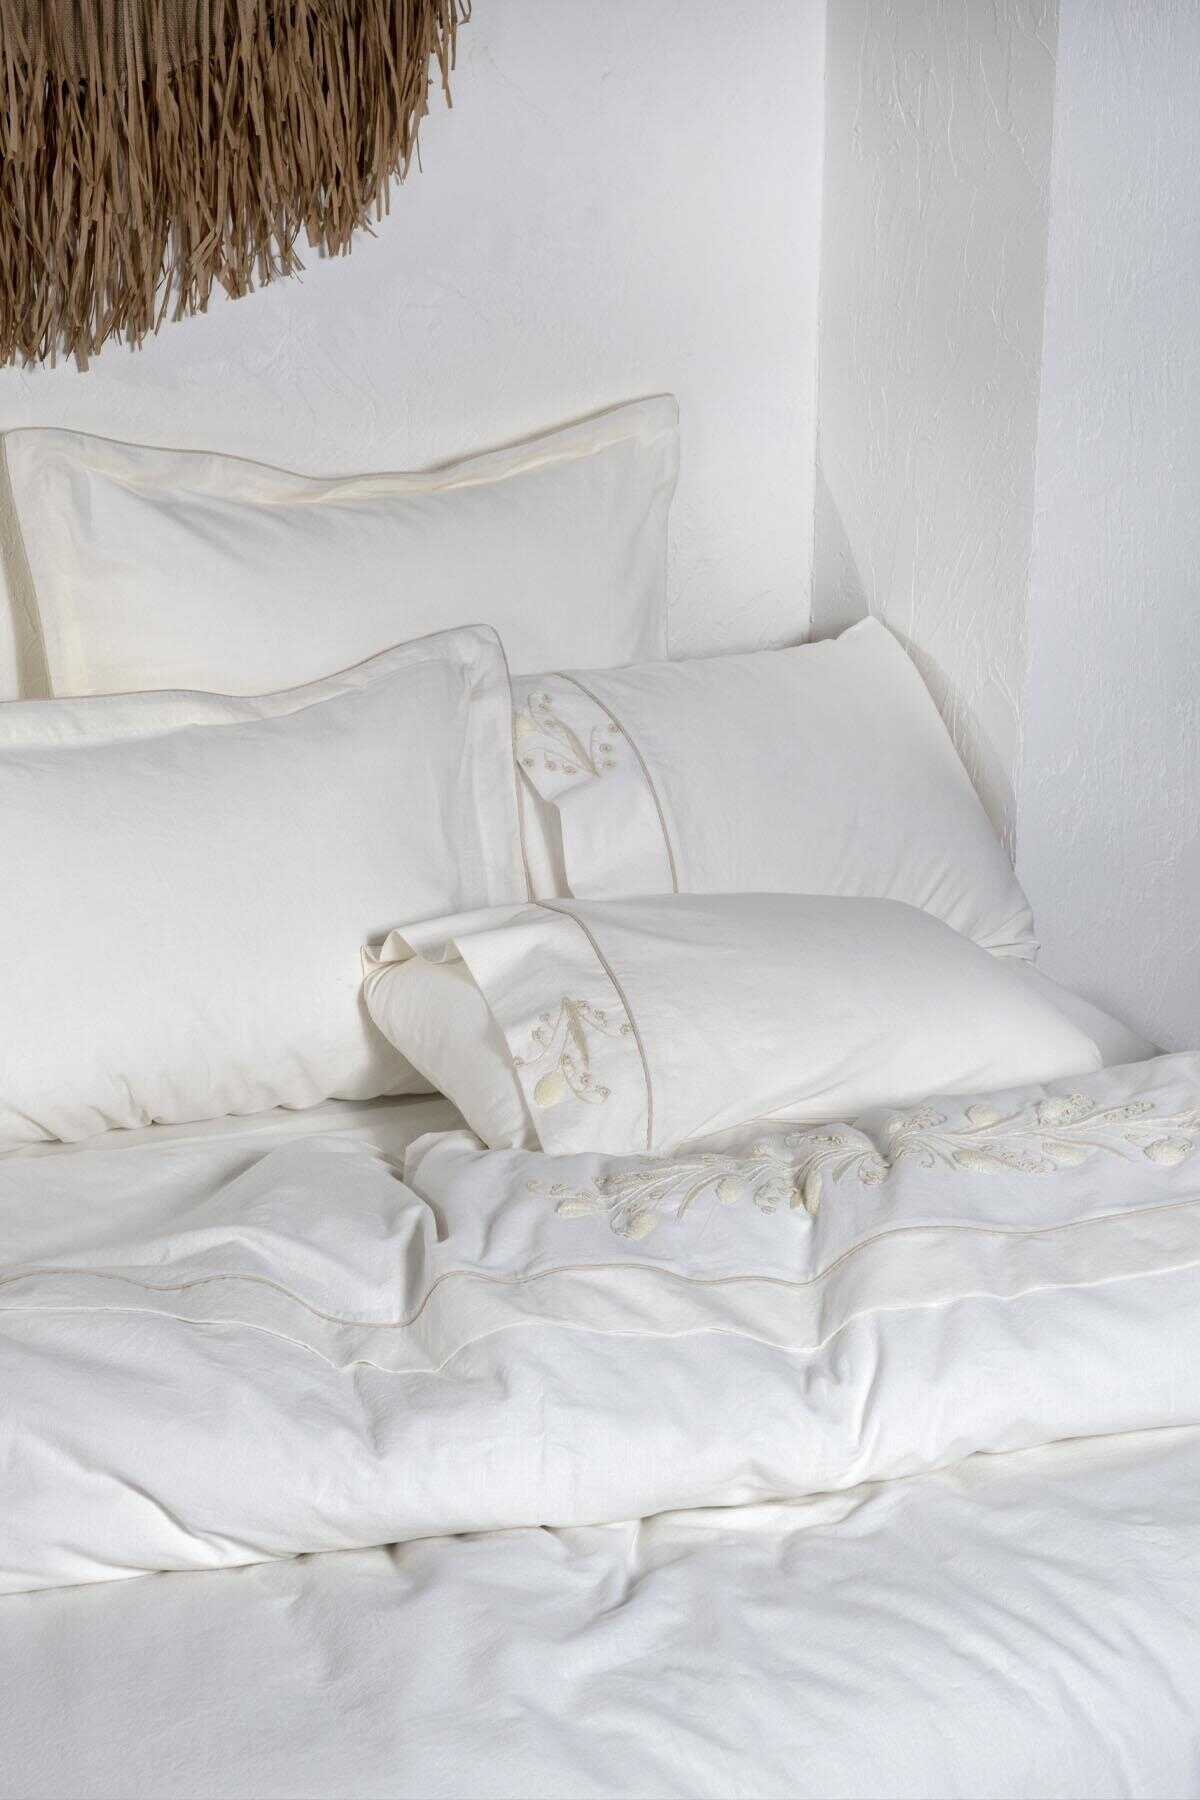 Ecocotton Lilya Organic Cotton Linen Embroidered Ecolarge Duvet Cover Set